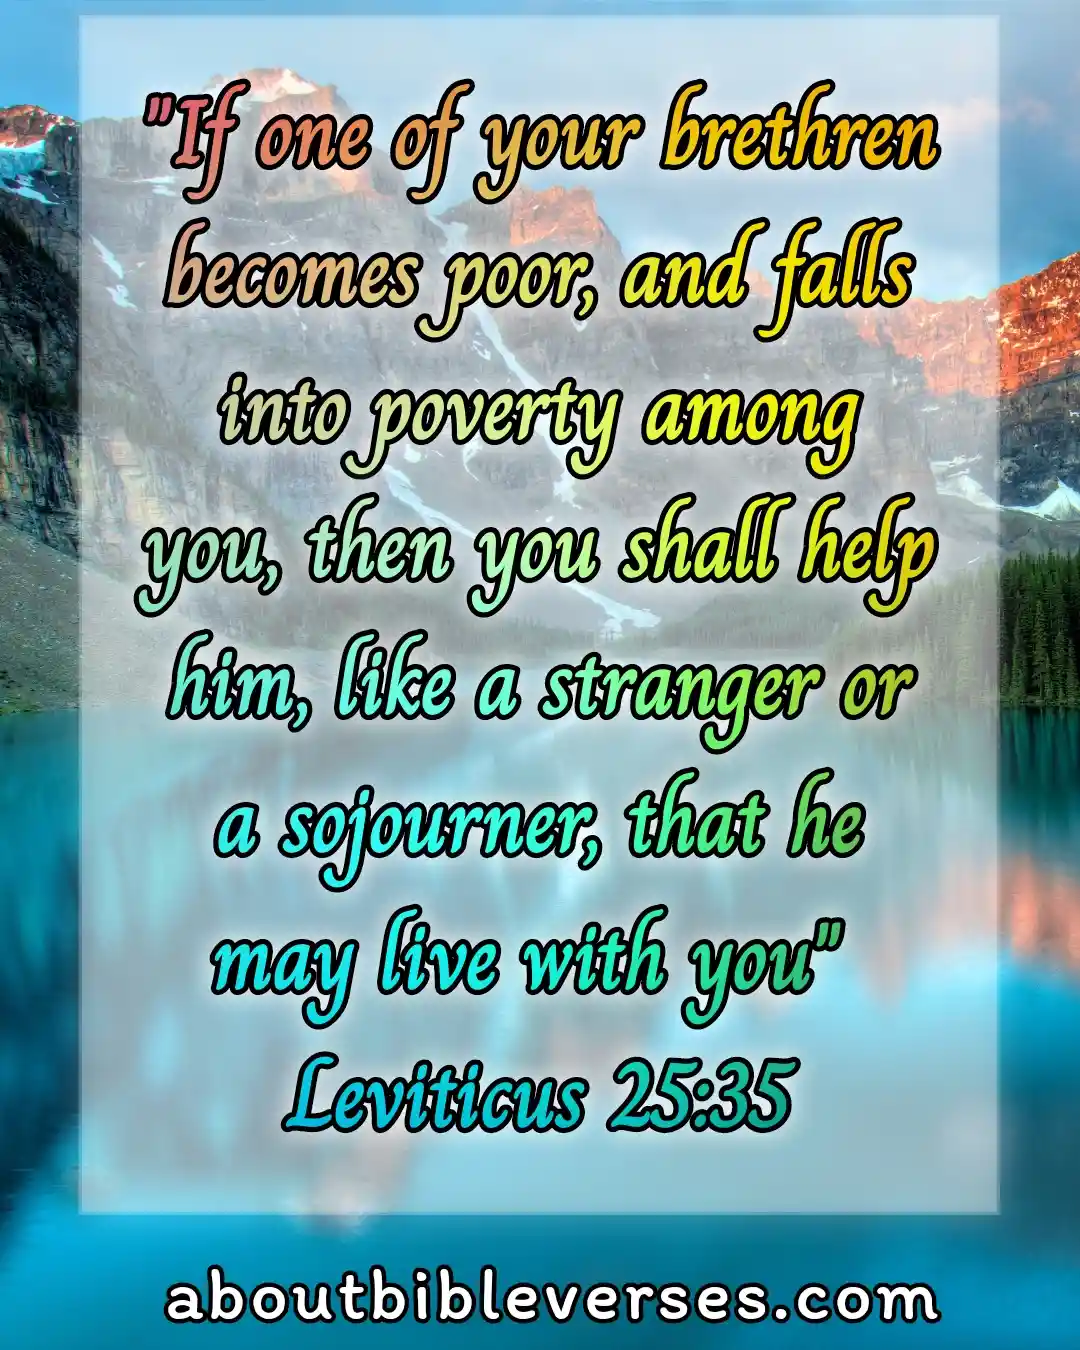 bible verses Helping To others (Leviticus 25:35)